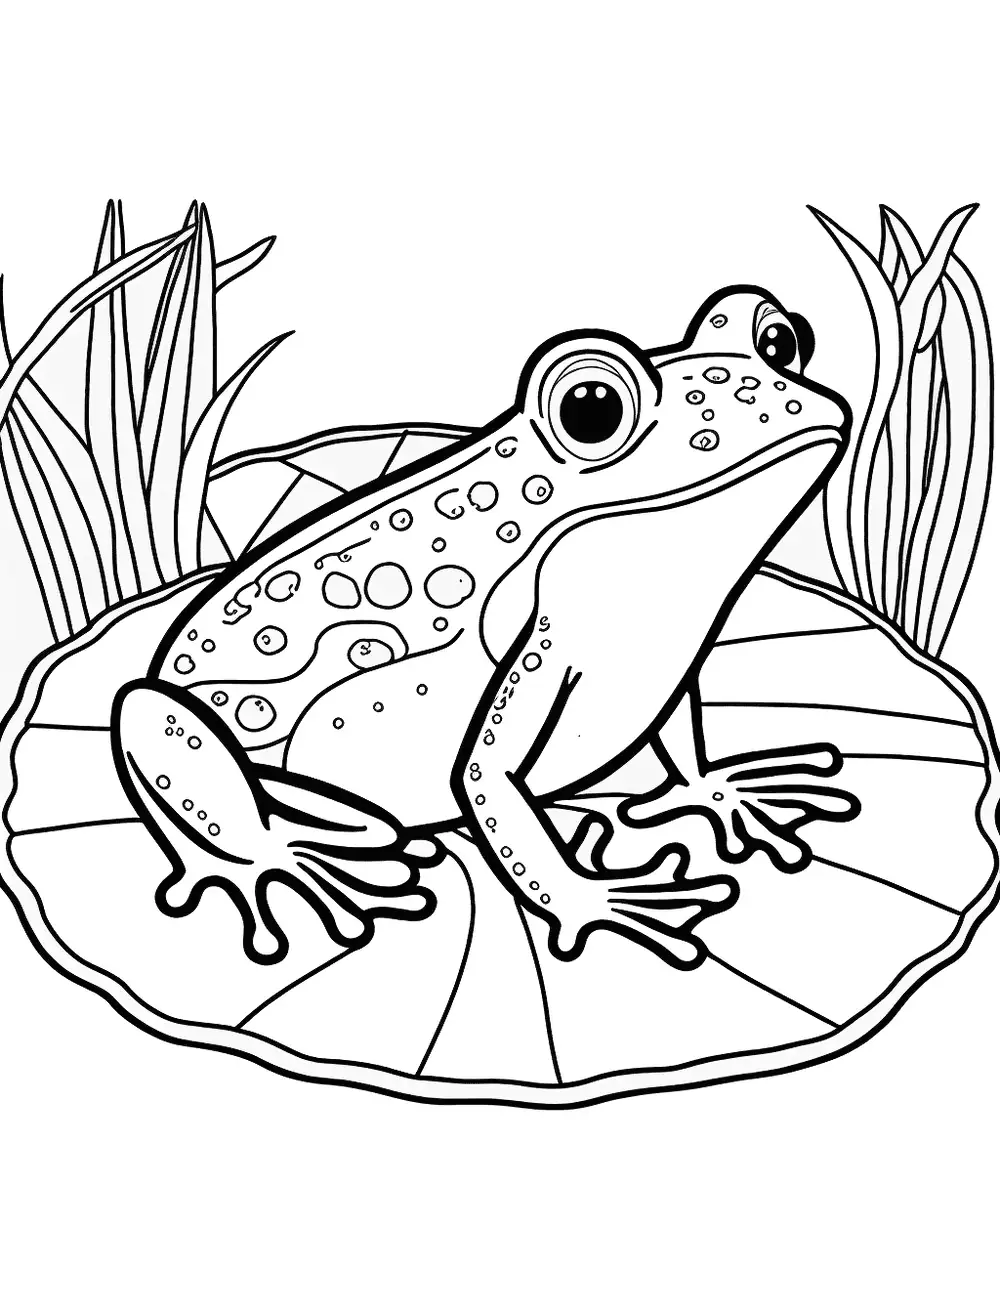 Frog On A Lily Pad Coloring Page - A frog sitting on lily pads in a pond